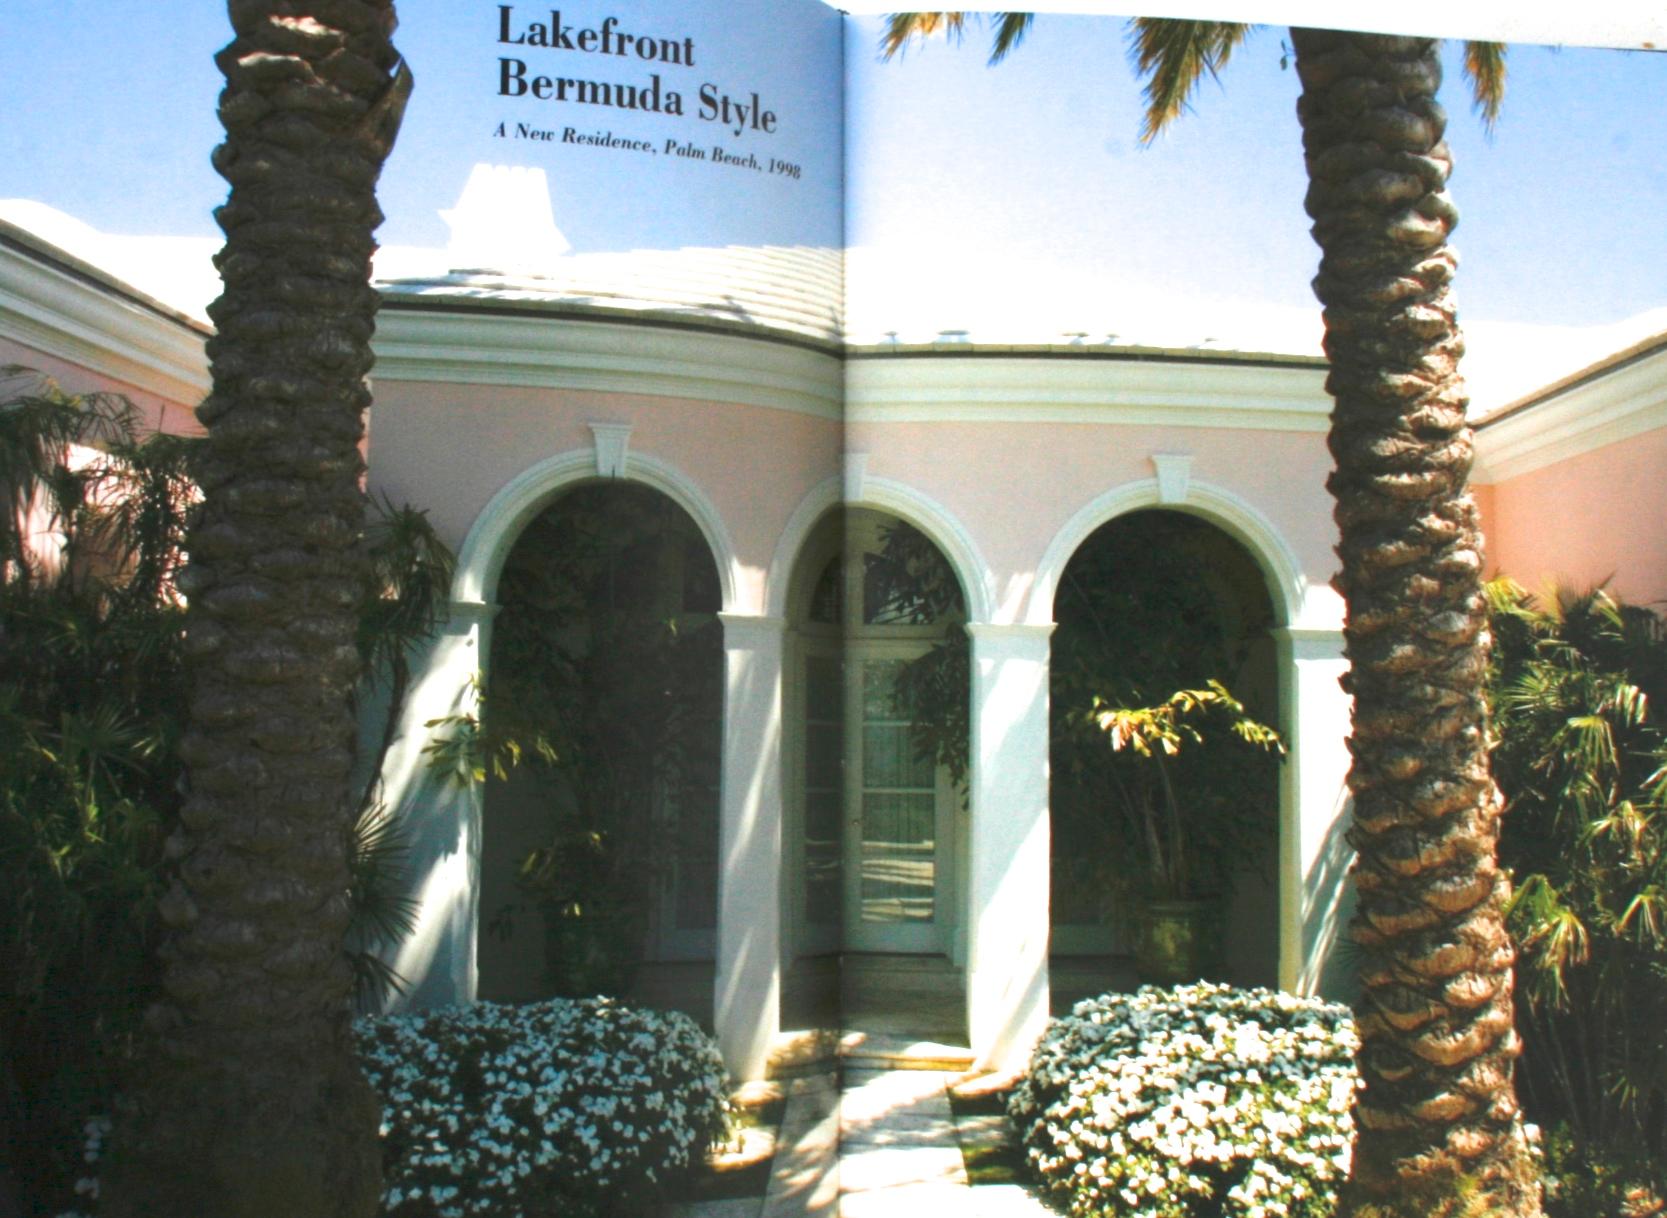 Contemporary “Palm Beach Splendor, The Architecture of Jeffrey W. Smith” Signed First Edition